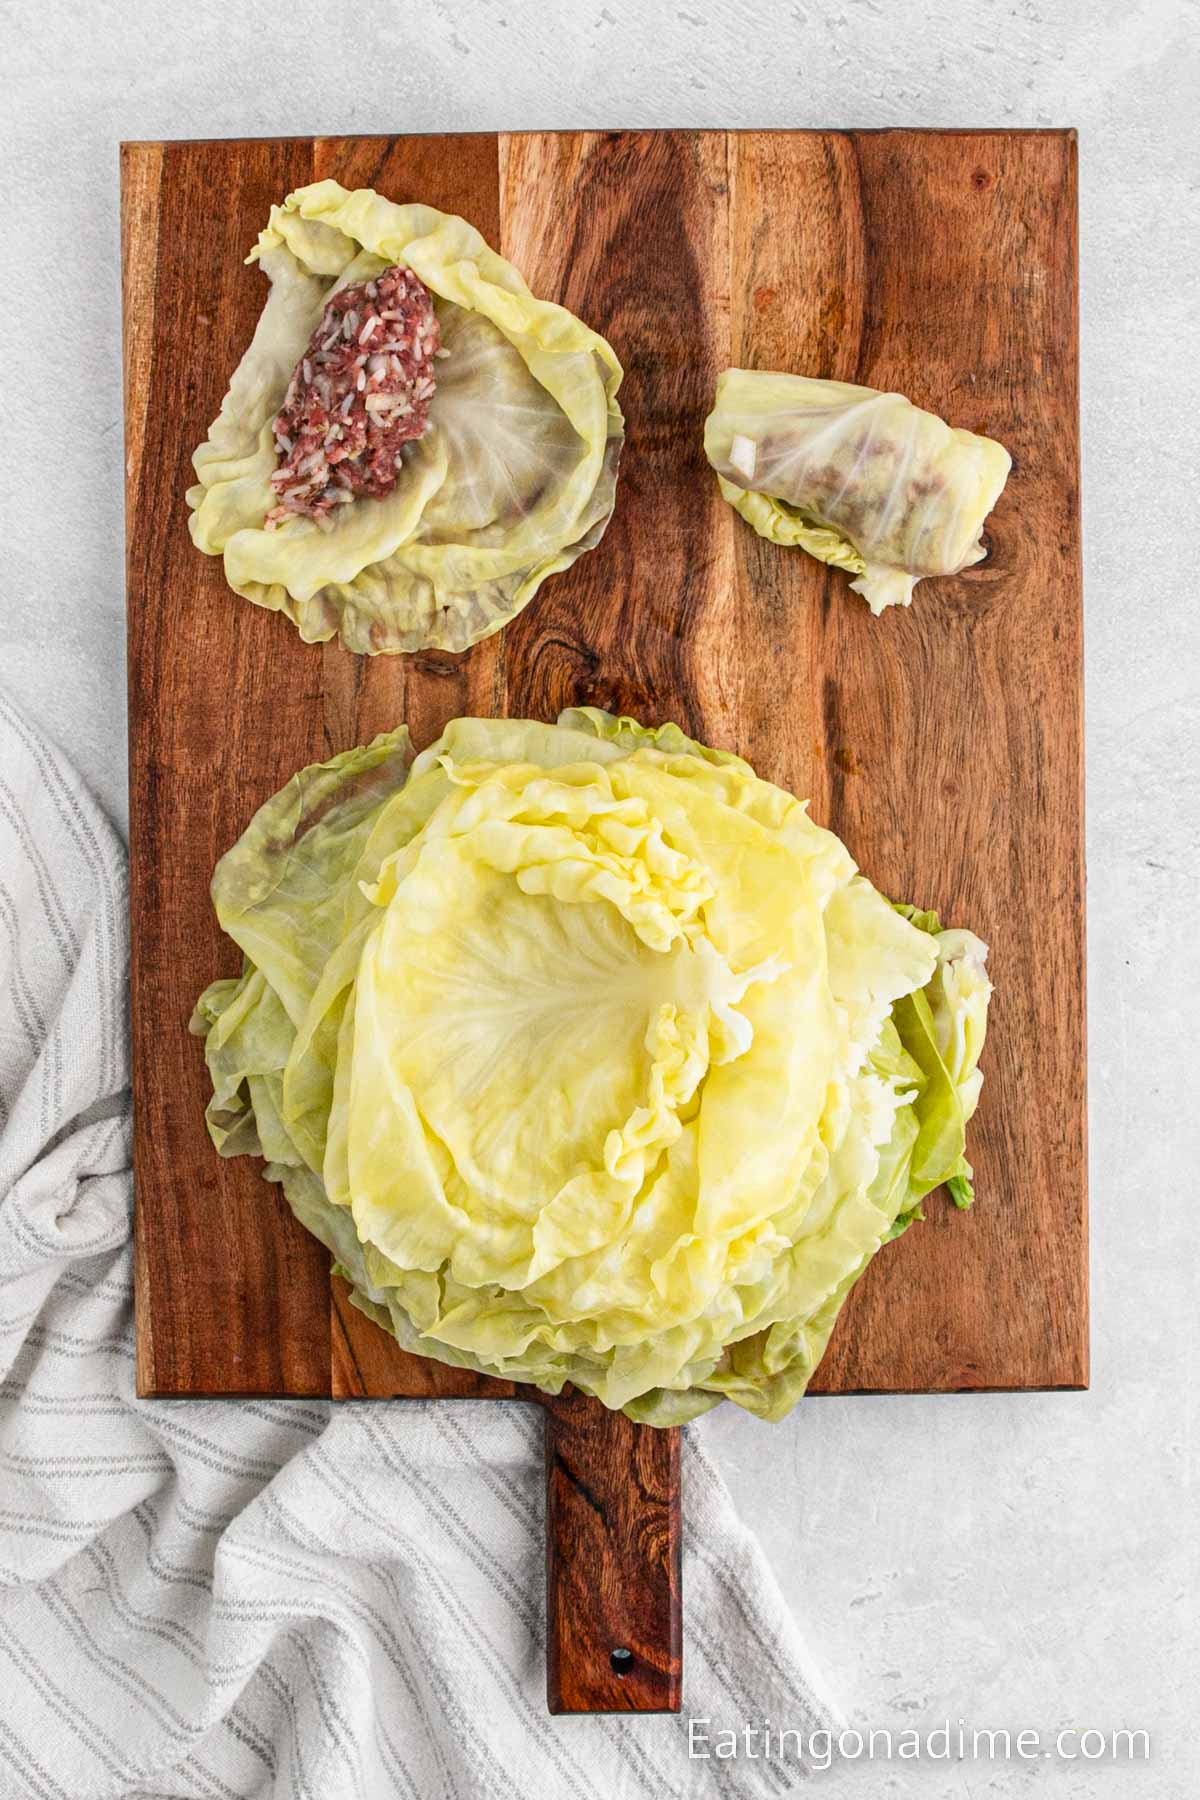 Preparing the cabbage rolls by rolling in the meat mixture